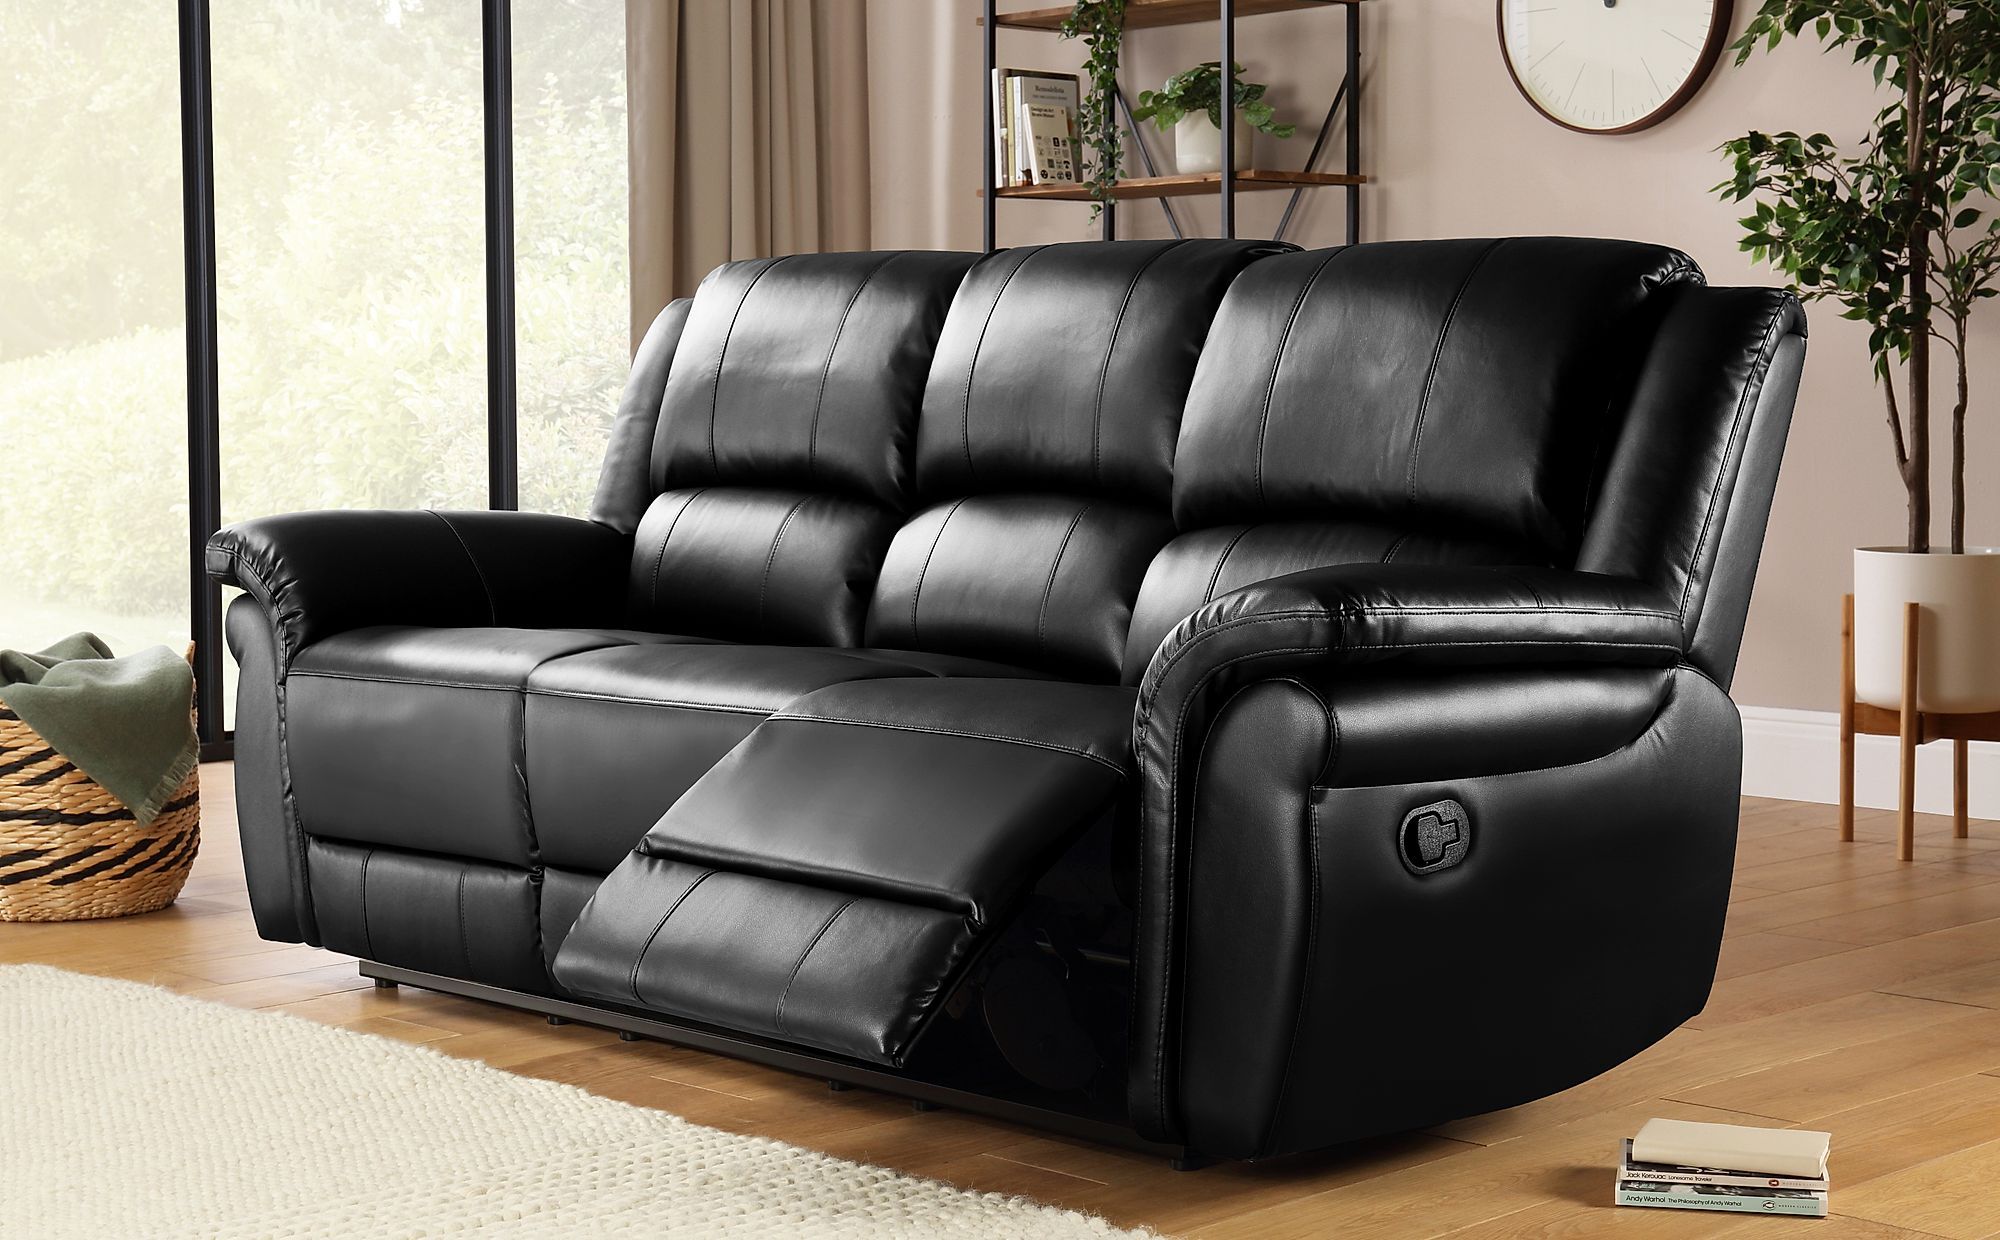 Lombard Black Leather 3 Seater Recliner Sofa | Furniture Choice In 3 Seat L Shaped Sofas In Black (View 7 of 20)